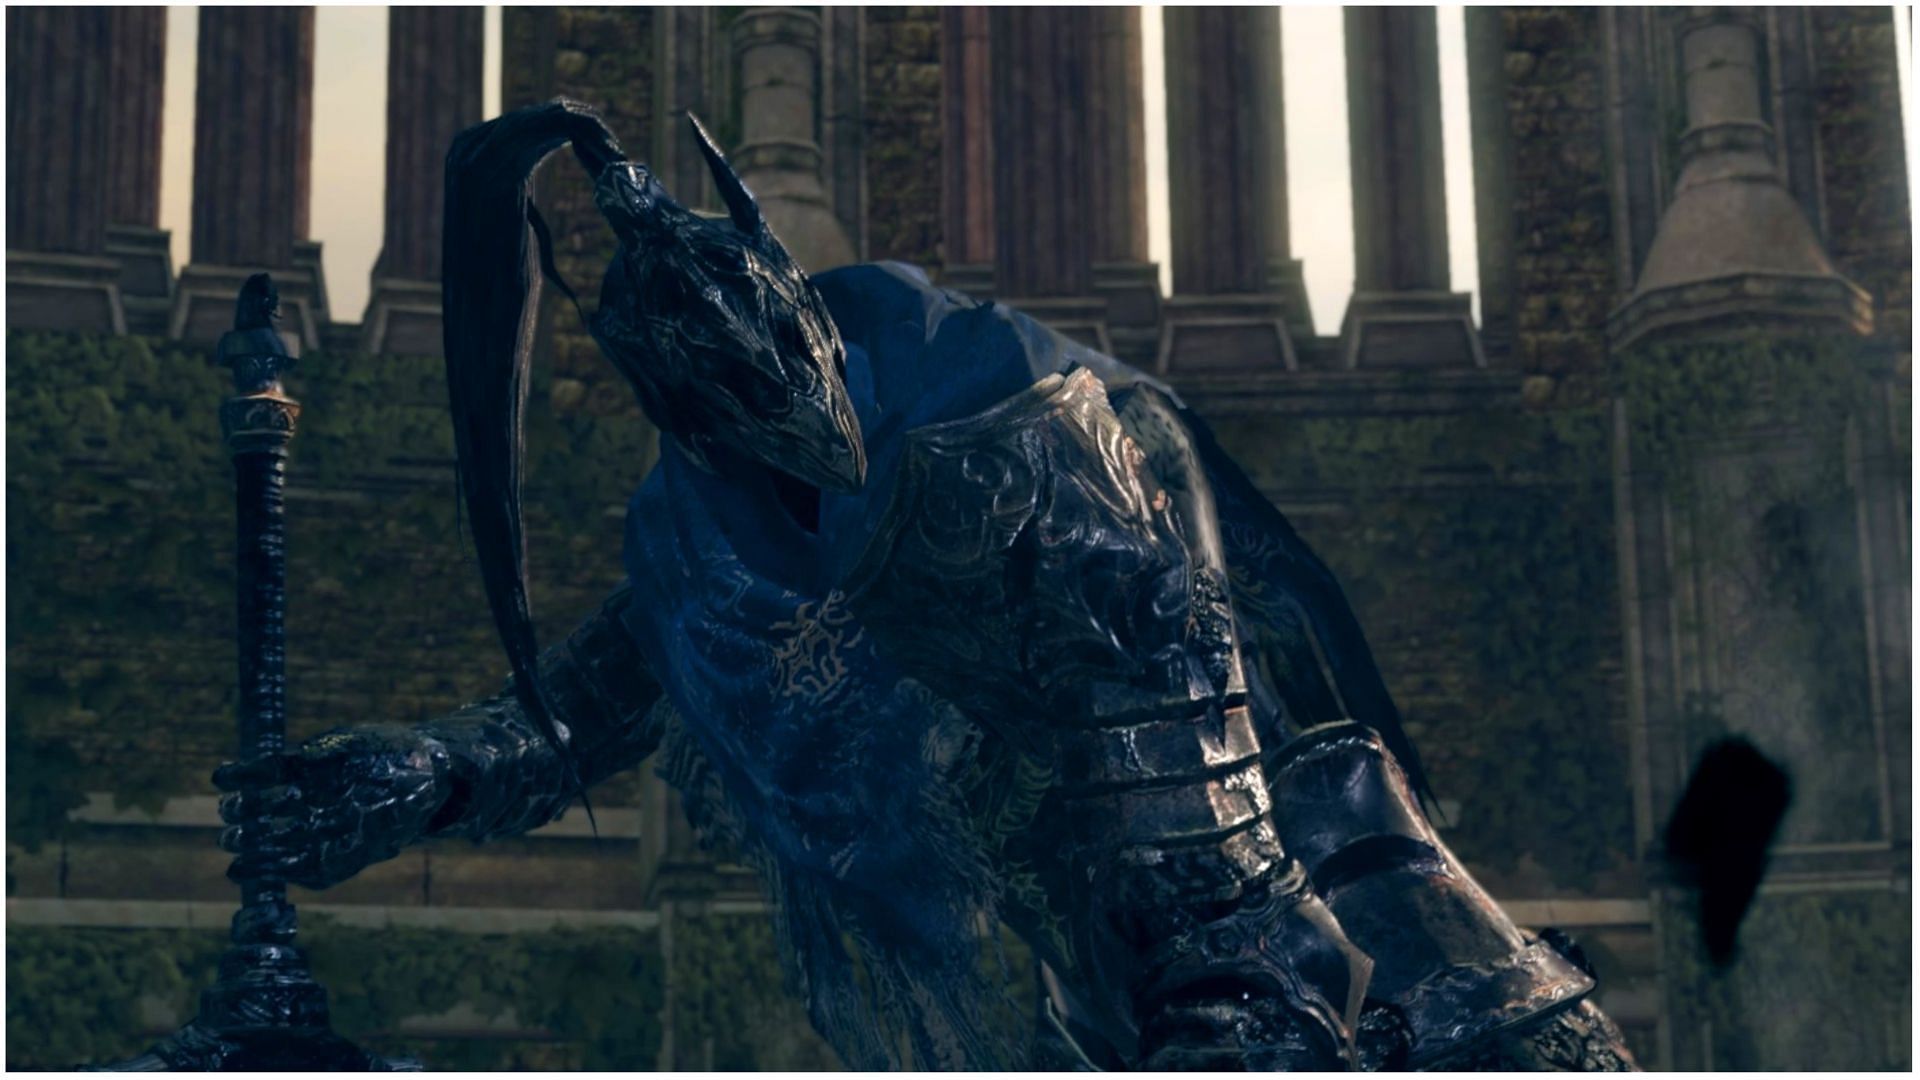 Knight Artorias is one of the hardest bosses in Dark Souls (Image via FromSoftware)